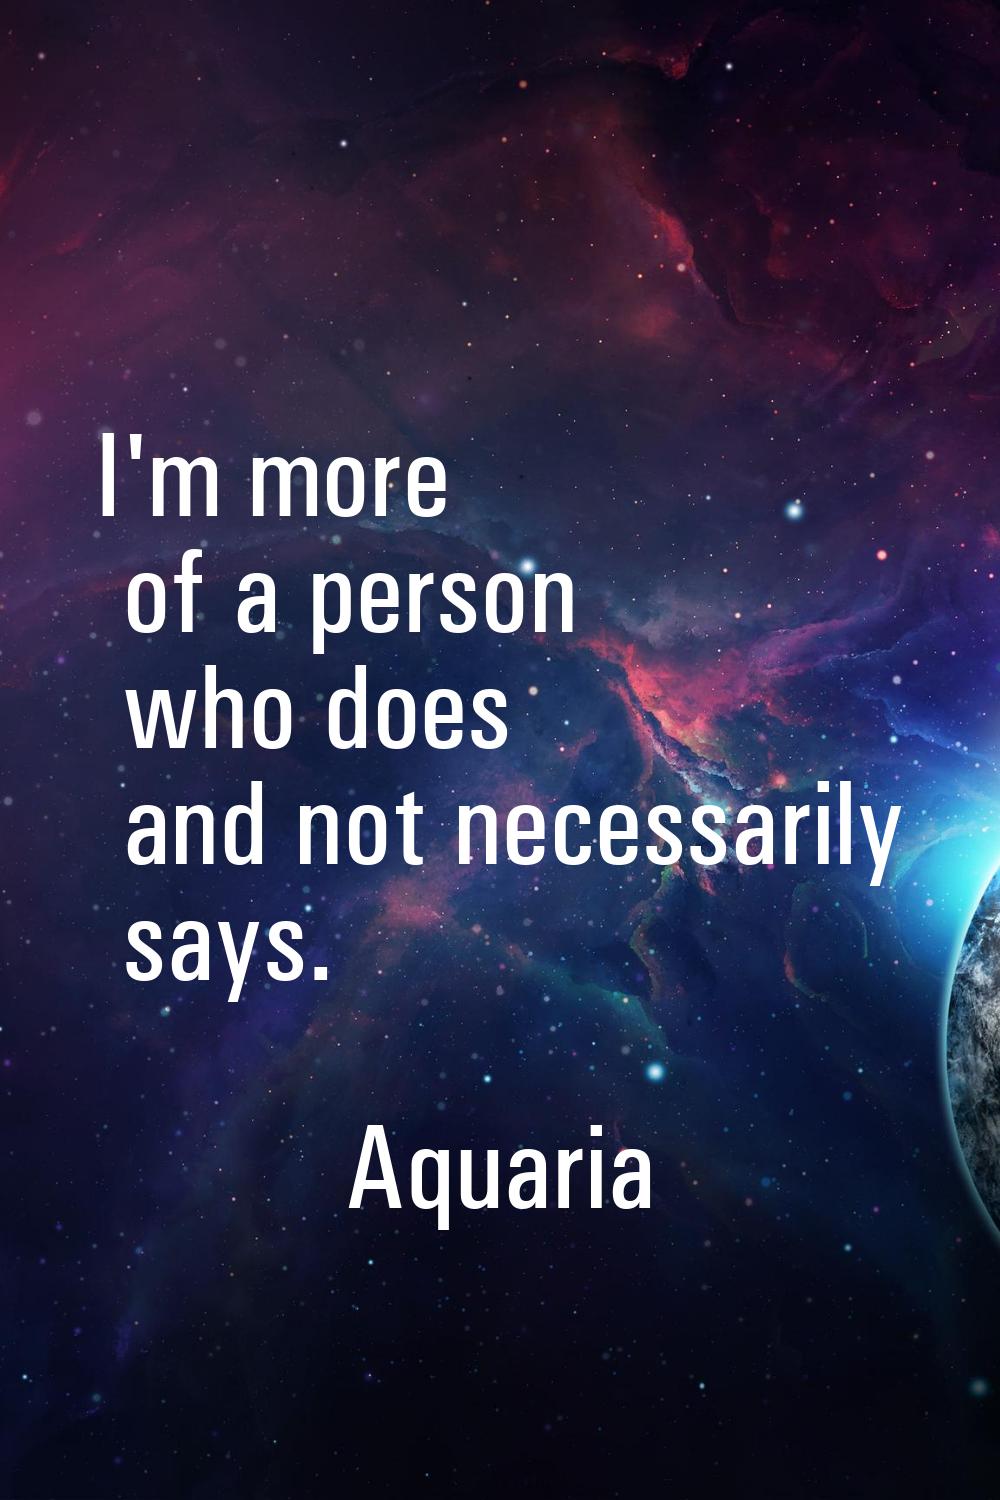 I'm more of a person who does and not necessarily says.